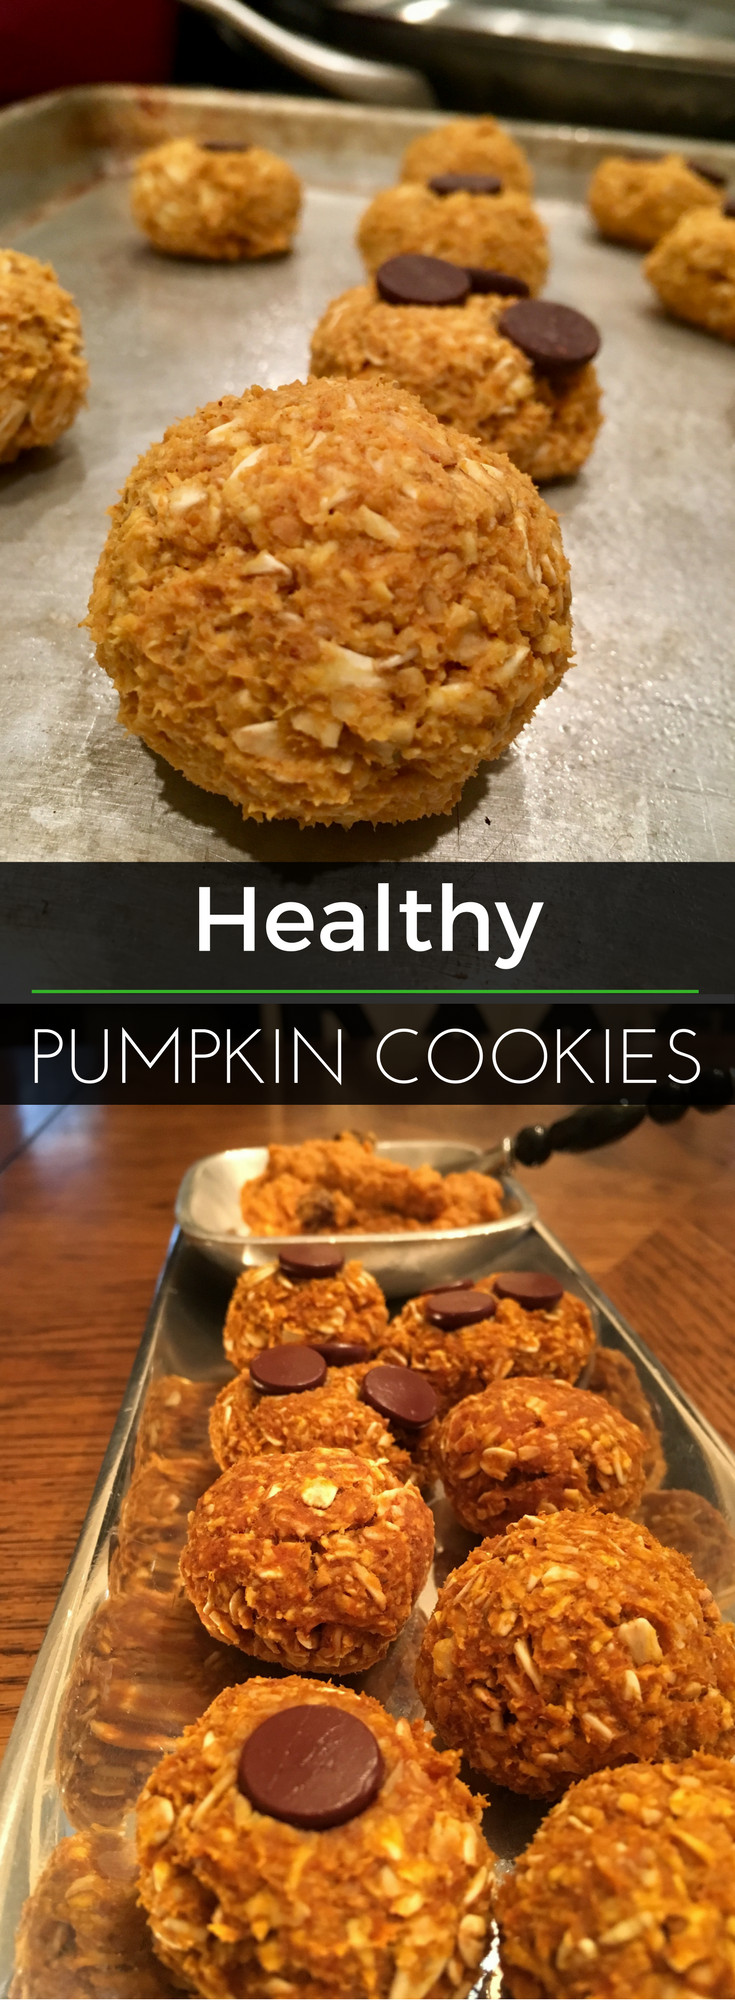 Pumpkin Cookies Healthy
 Healthy Pumpkin Cookies Clearly Organic